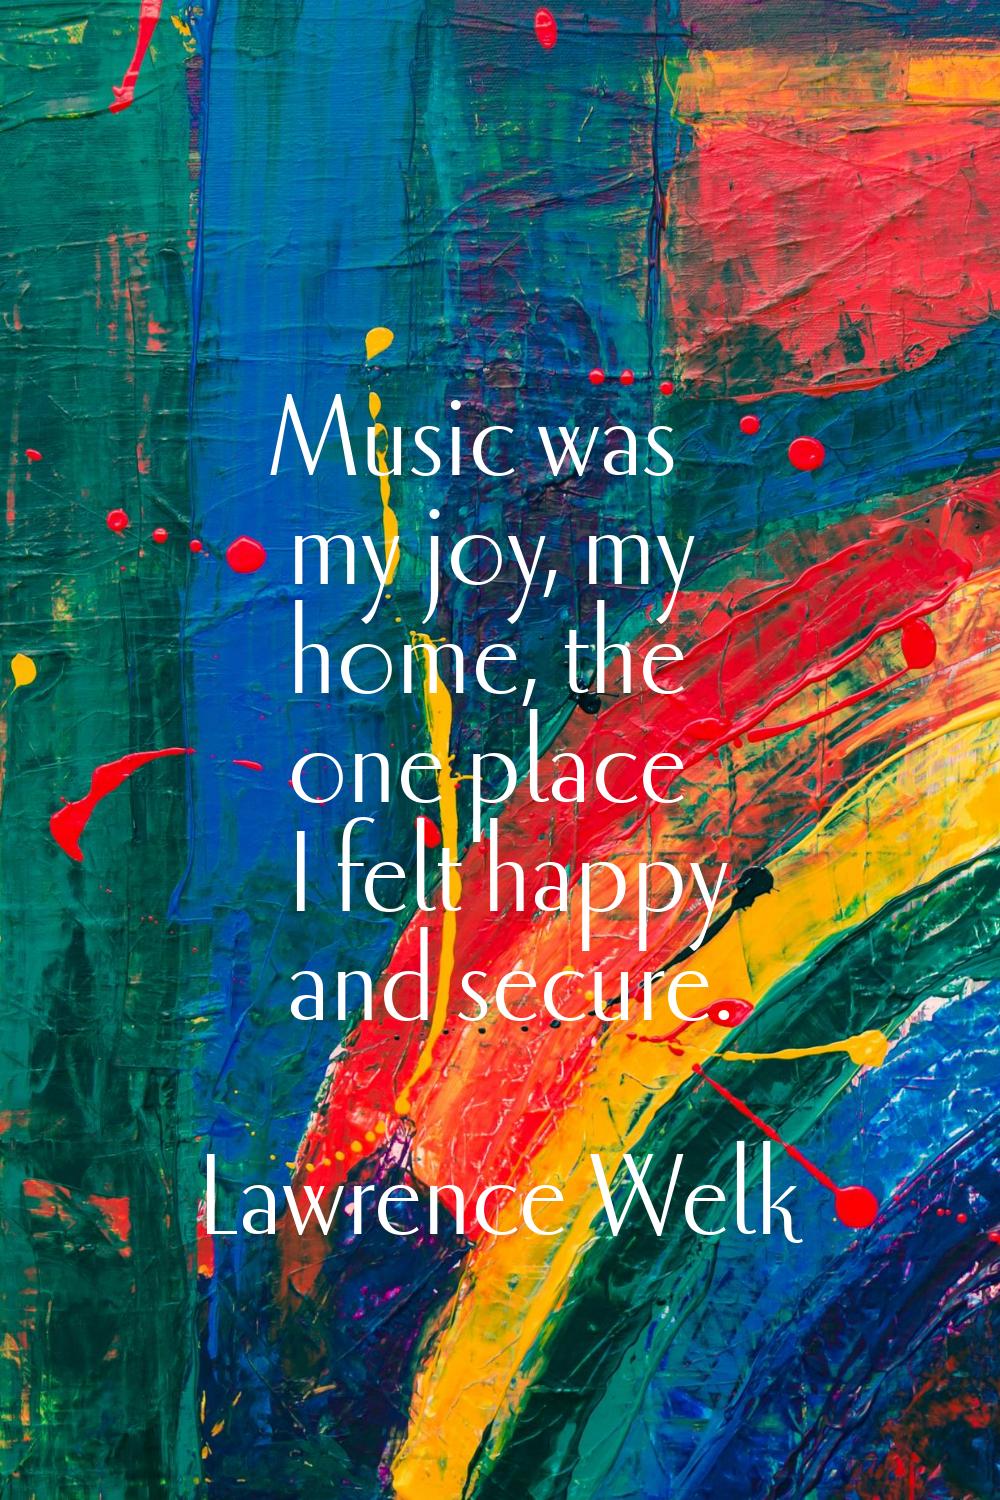 Music was my joy, my home, the one place I felt happy and secure.